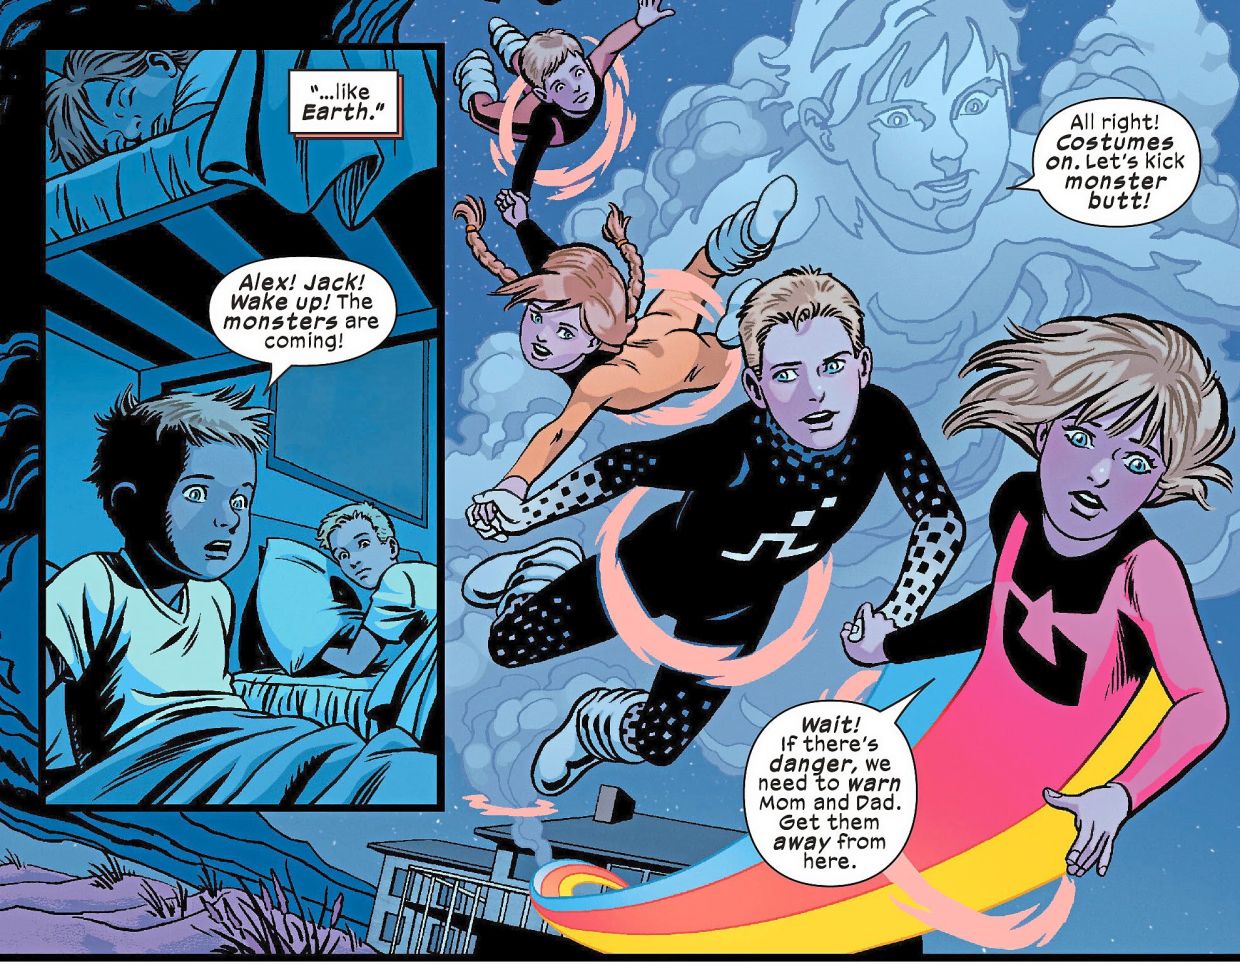 A new miniseries titled Power Pack: Into The Storm was released in January this year.